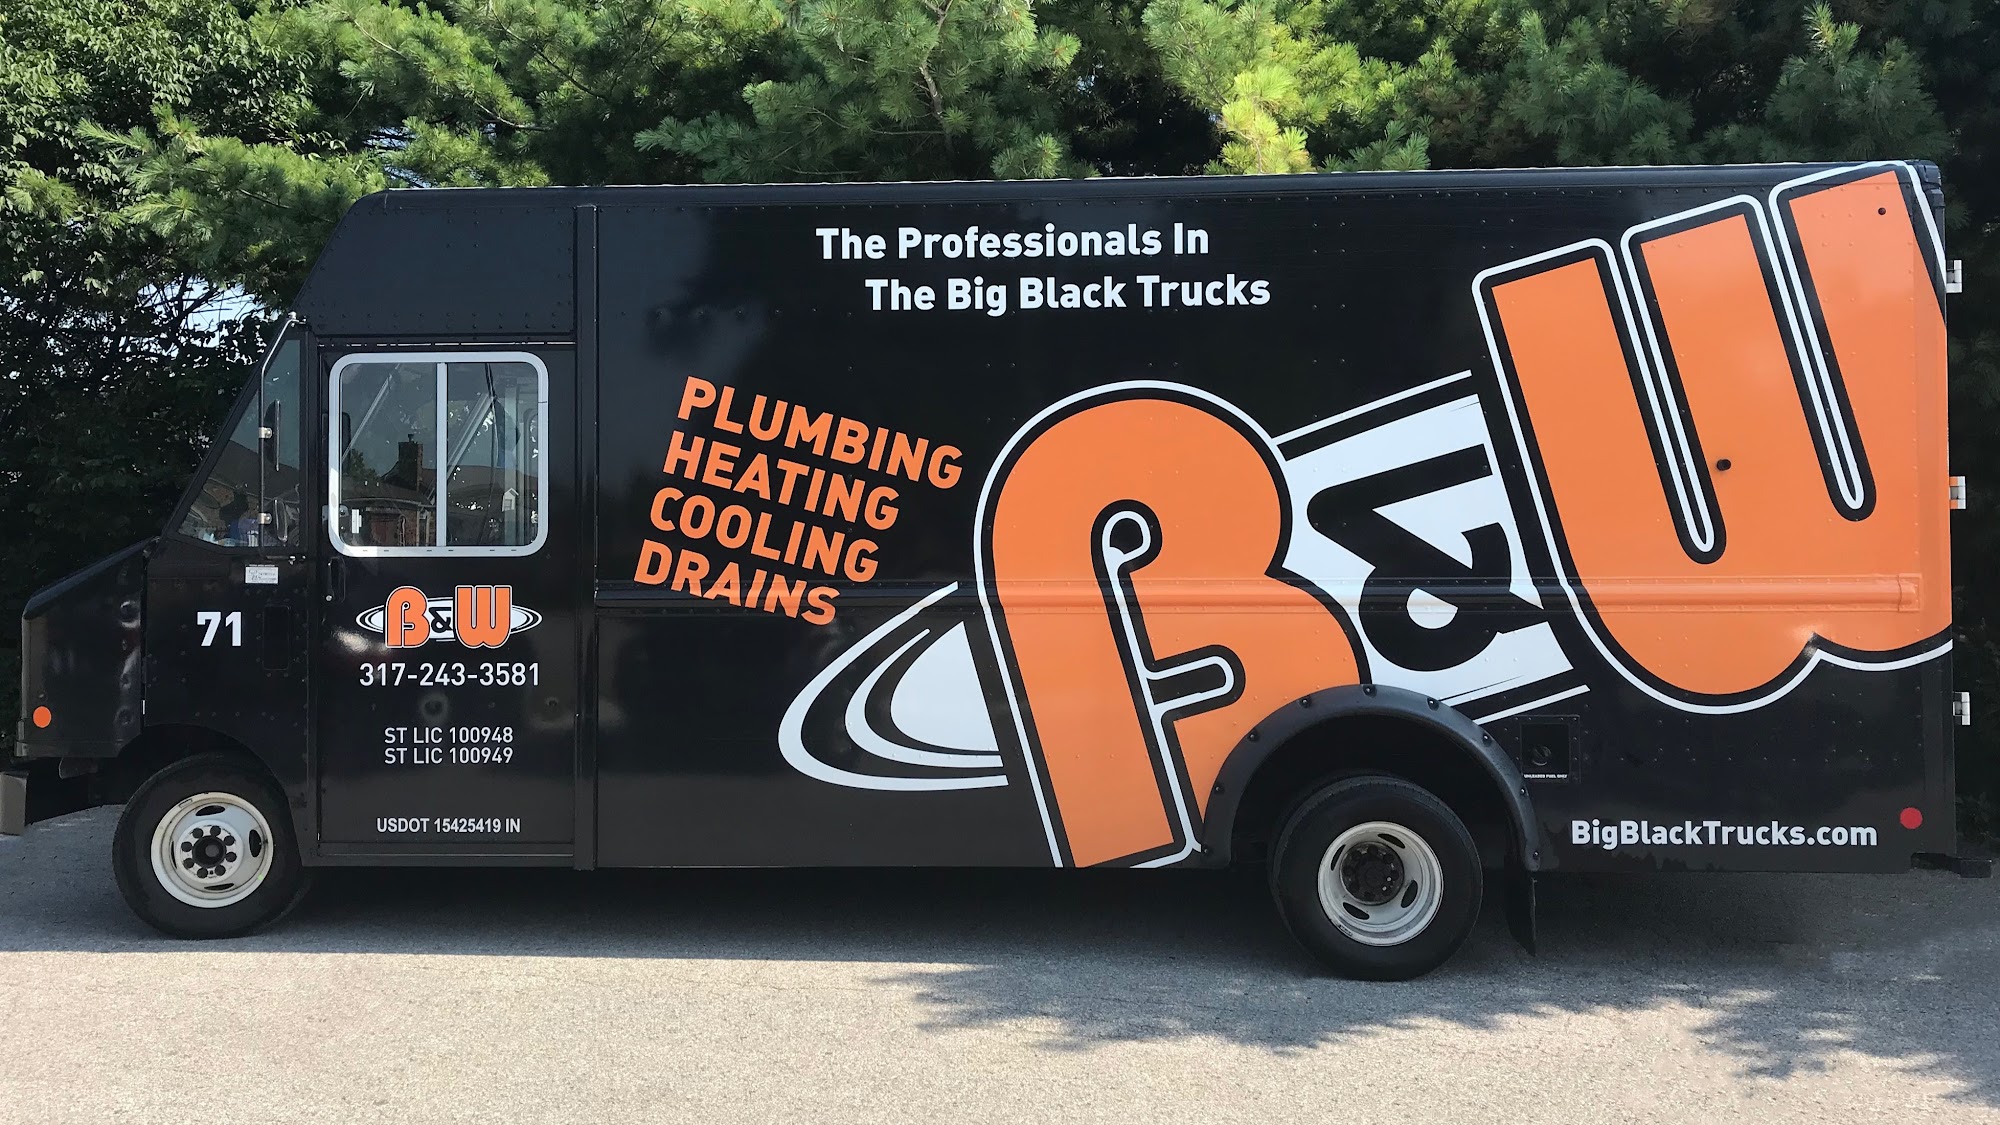 B&W Plumbing Heating Cooling and Drains